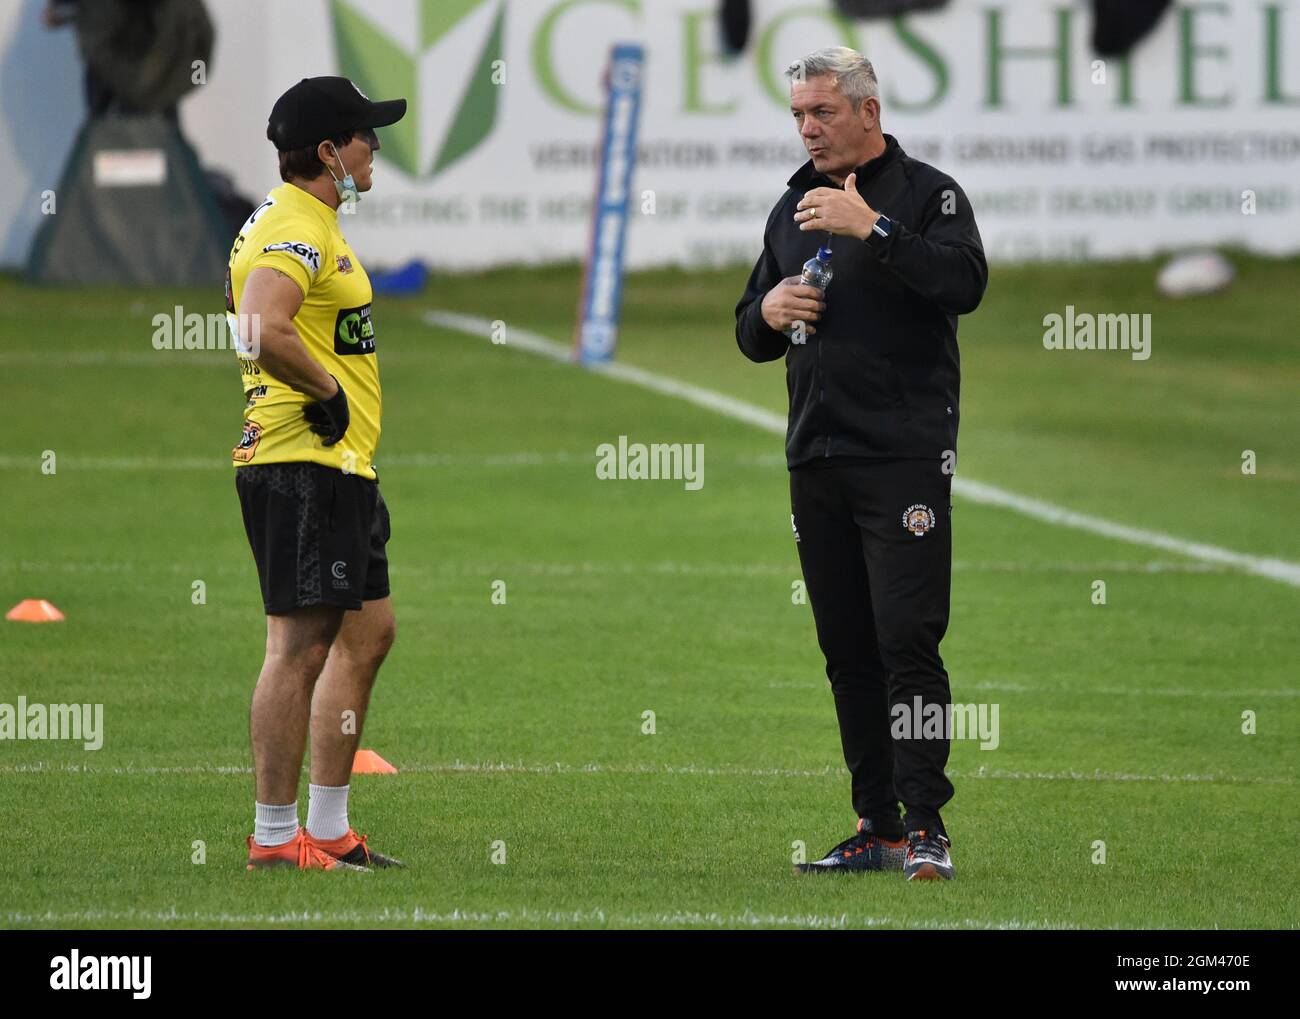 Castleford, United Kingdom on 16th September 2021: during the Betfred Super League match between Castleford Tigers and Warrington Wolves at the Mend A Hose Jungle, Castleford, United Kingdom on 16th September 2021 Credit: Craig Cresswell/Alamy Live News Stock Photo